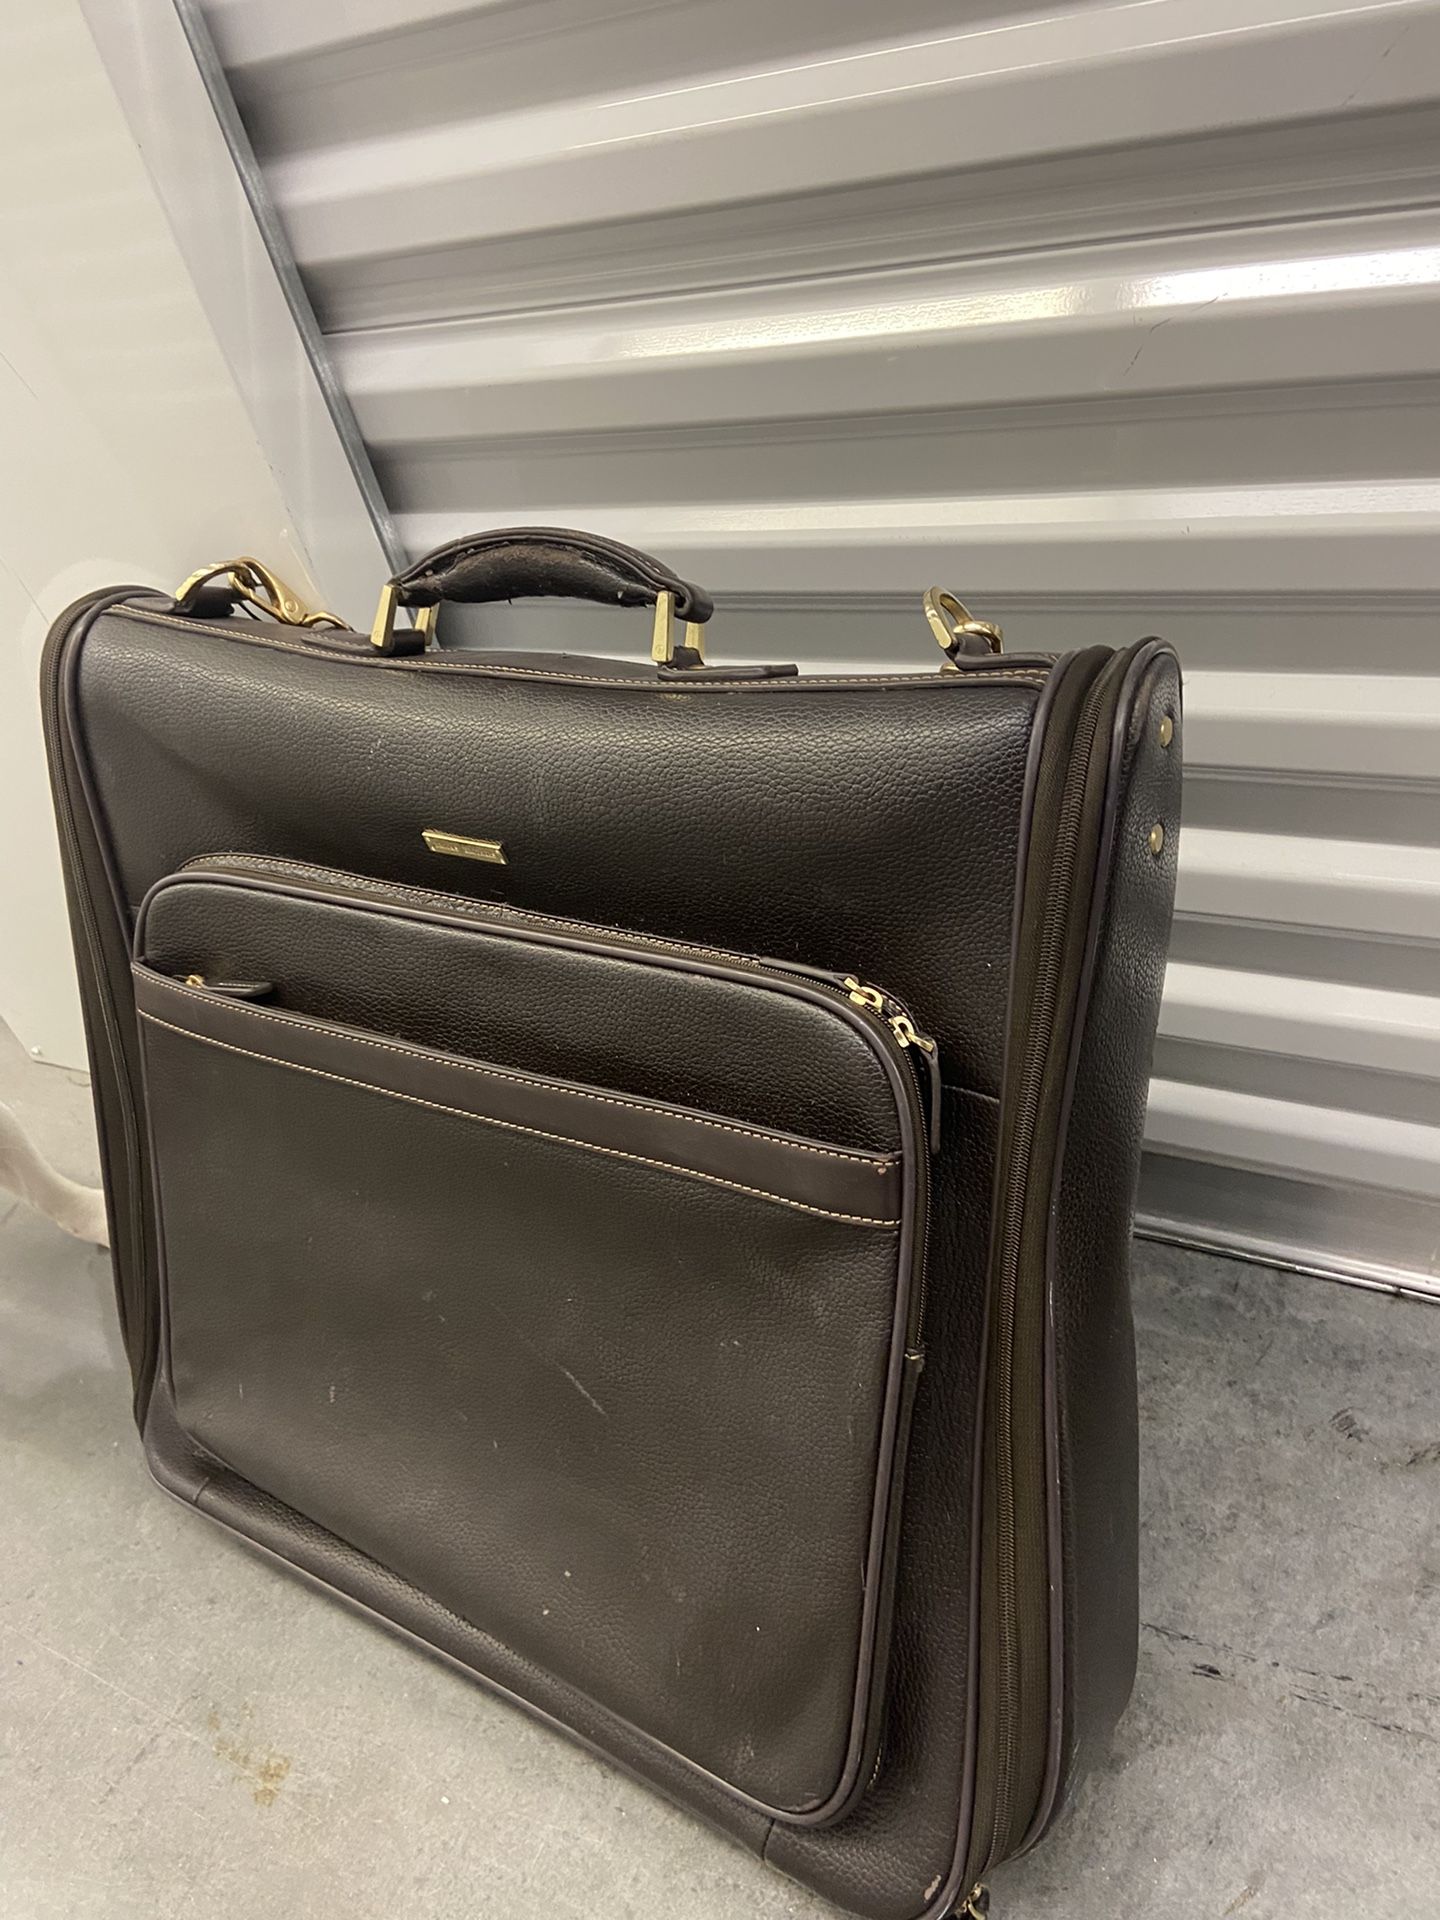 Brooks Brothers Garment Bag Luggage, Brown Leather 